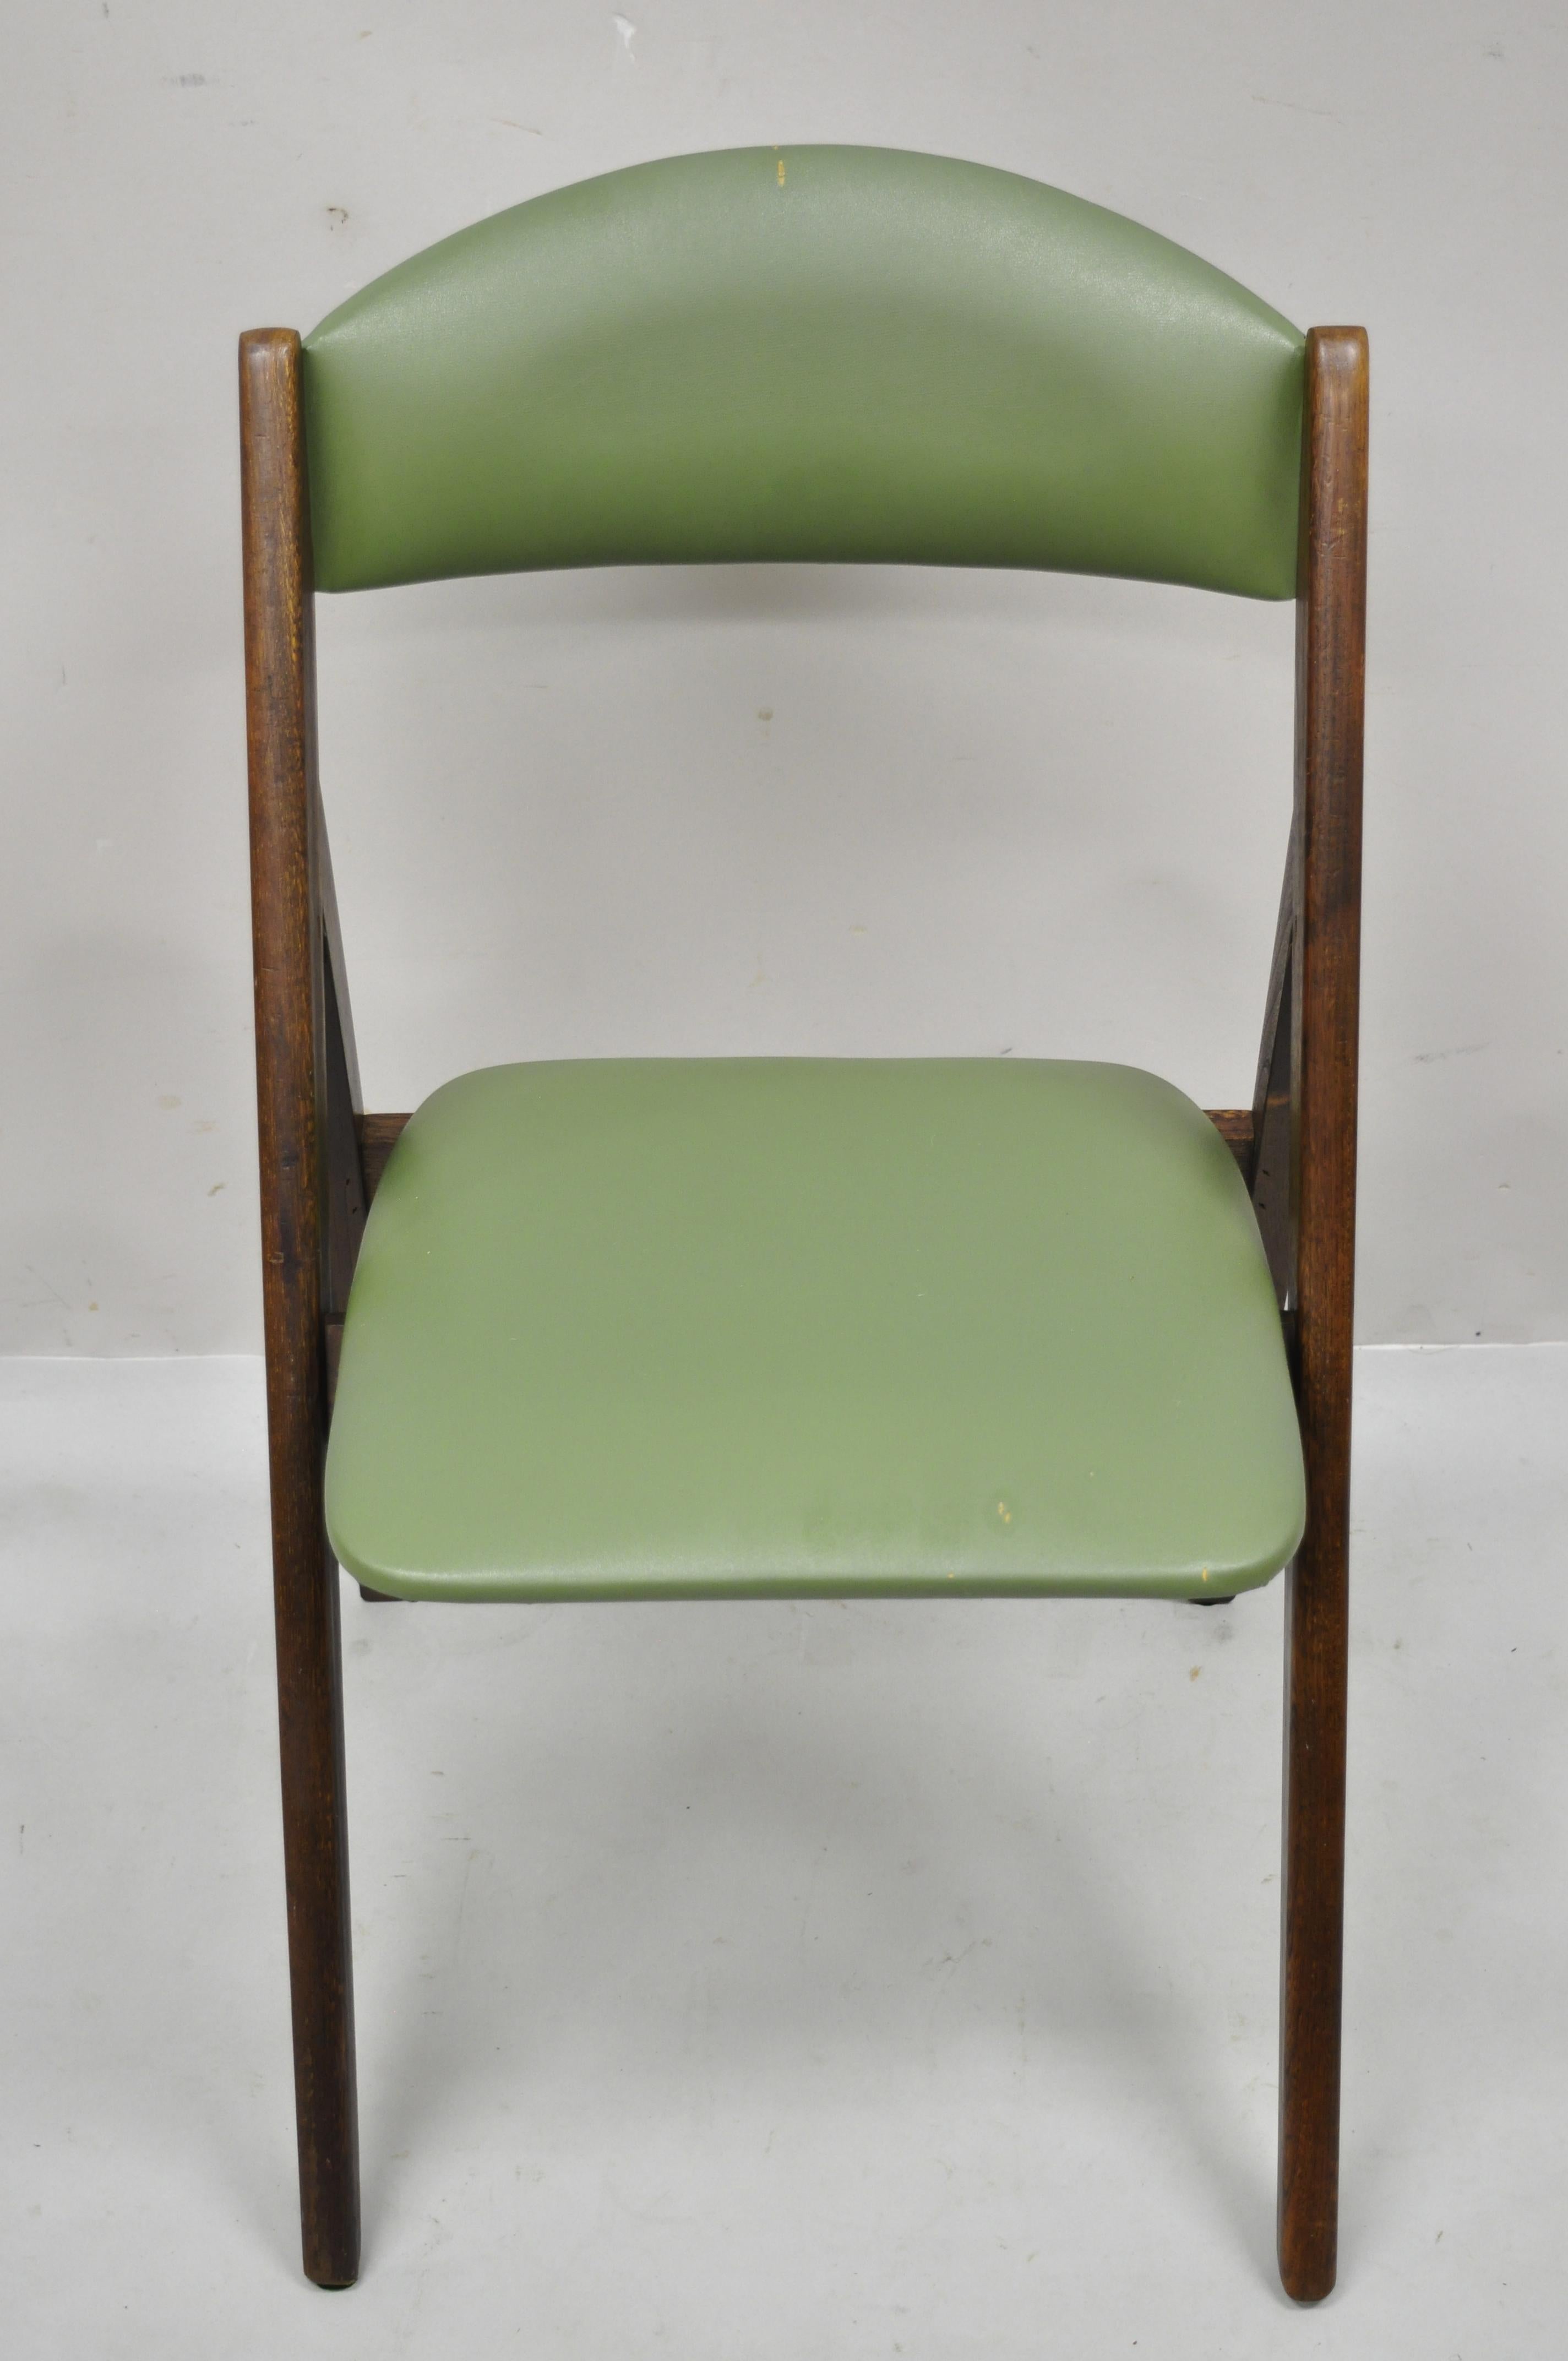 Naugahyde Vintage Mid-Century Modern Stakmore Solid Wood Folding Dining Game Table Chair